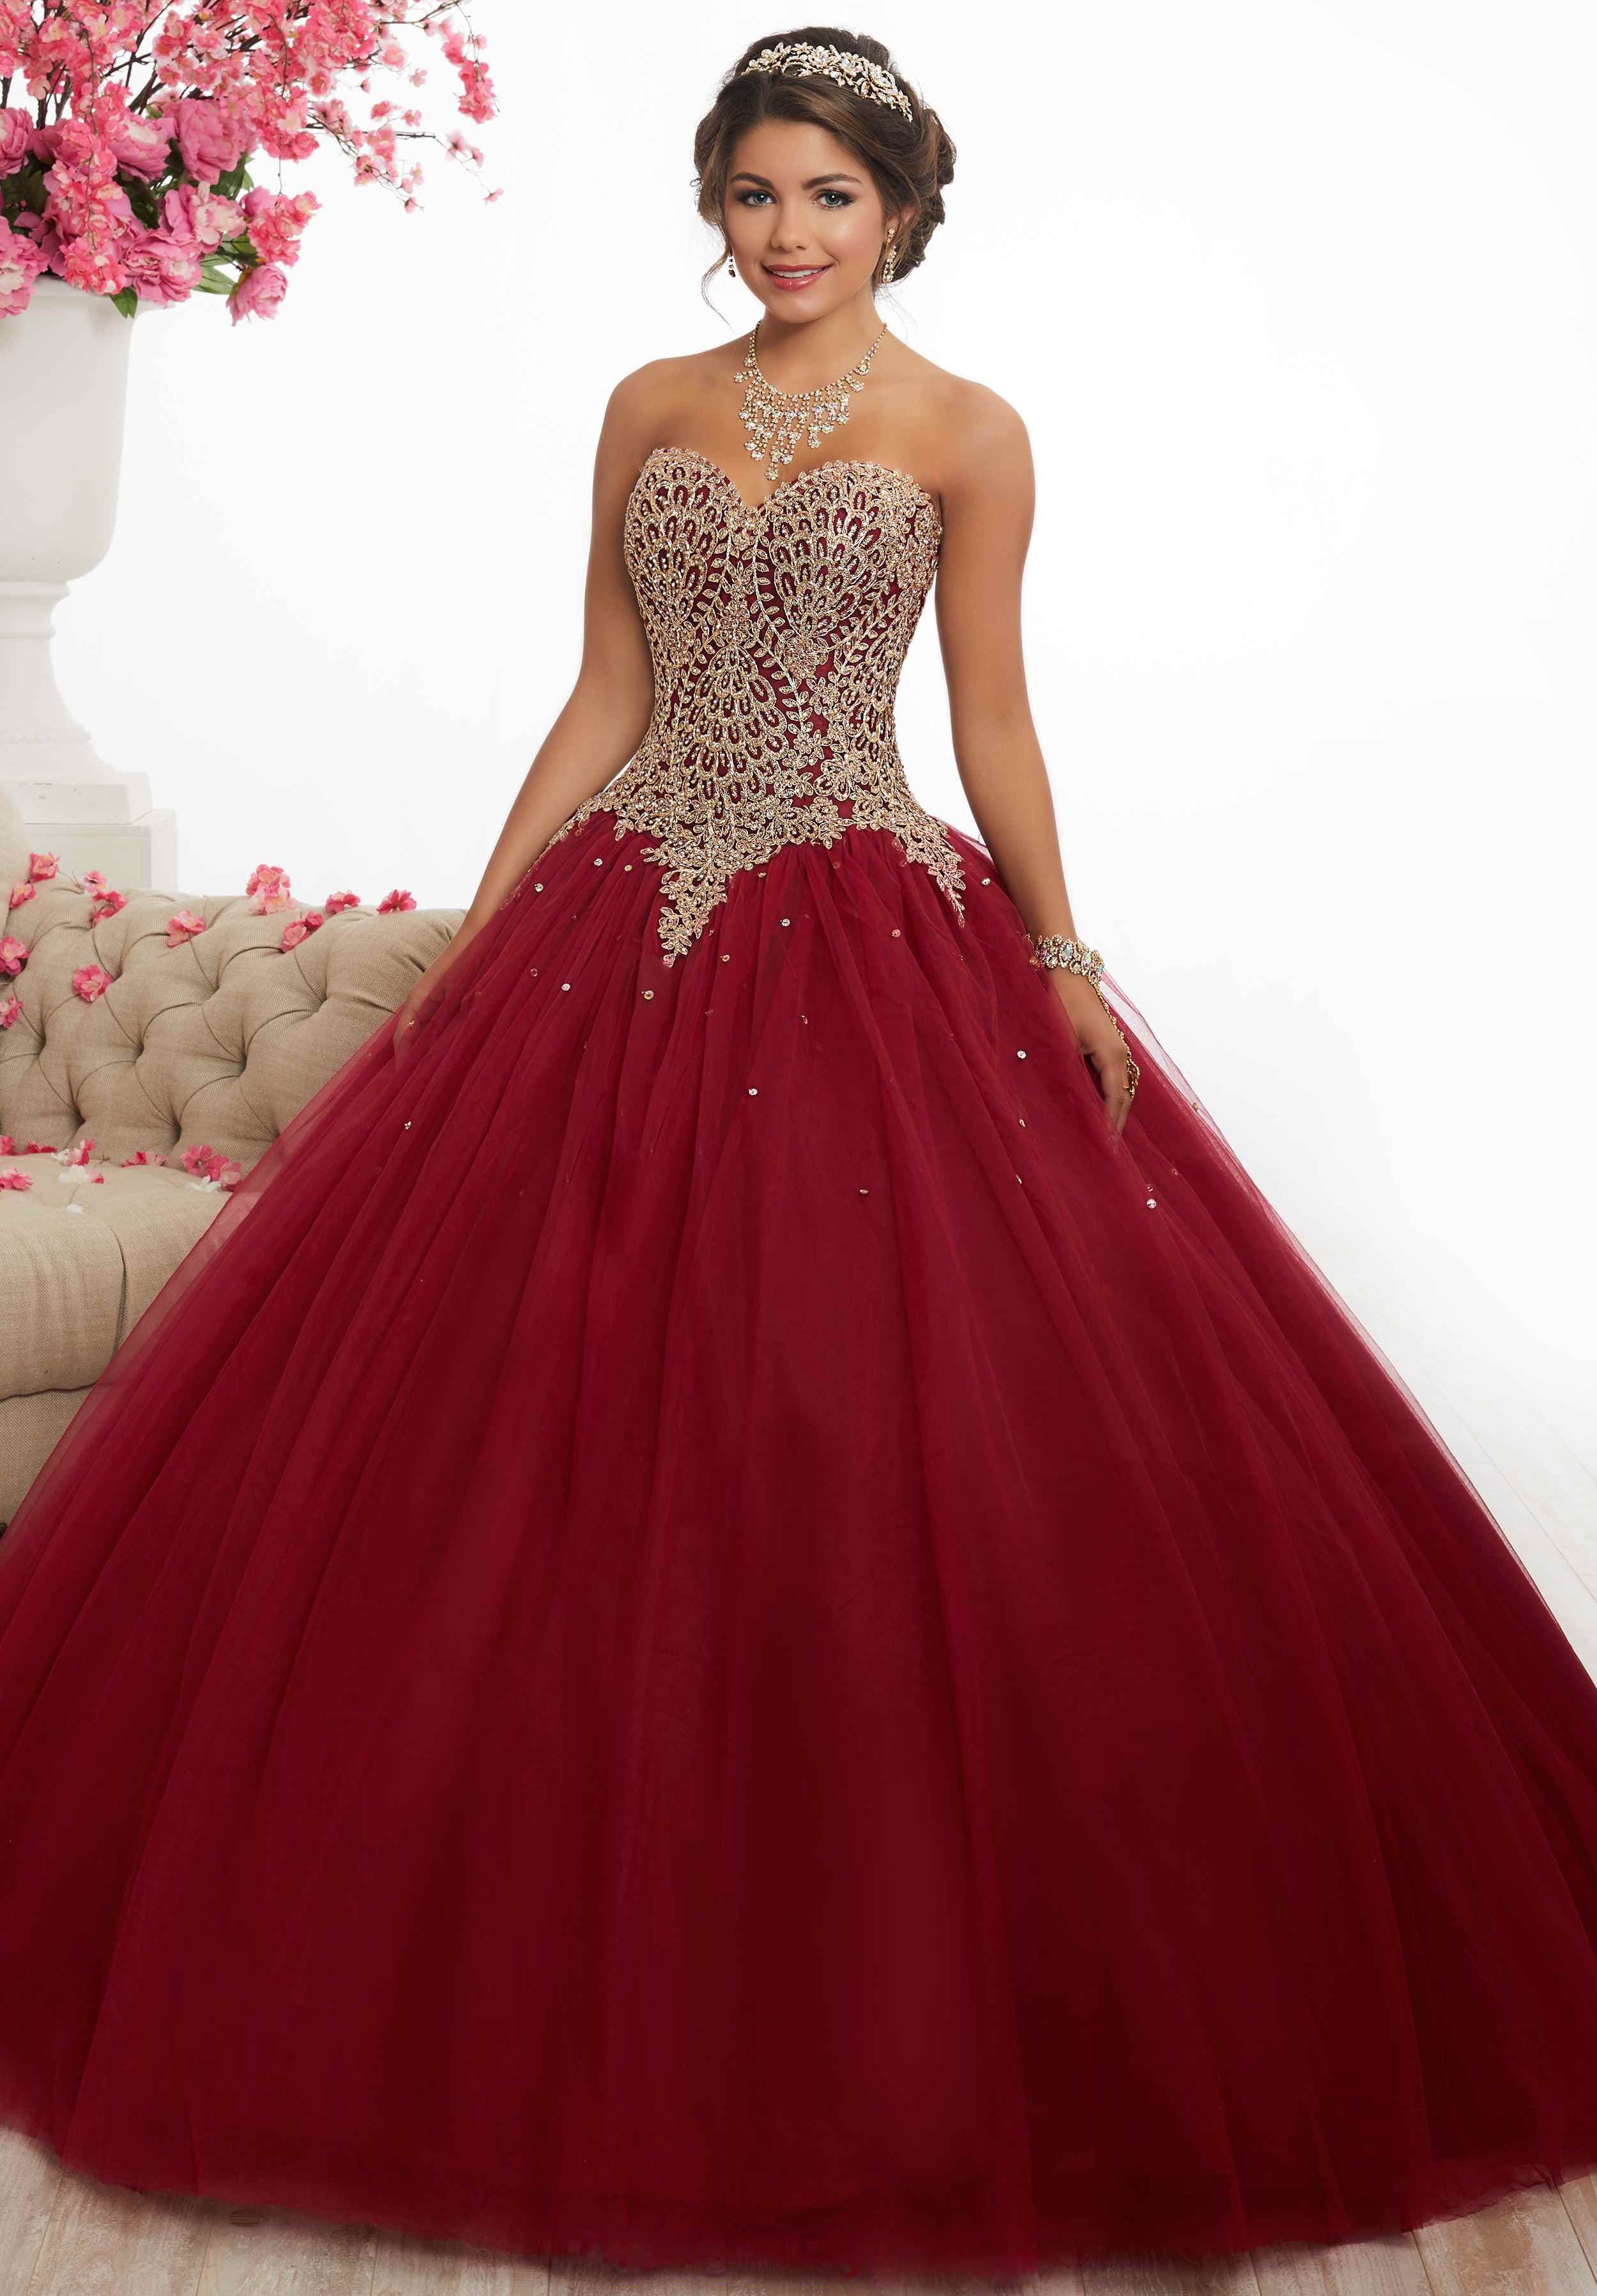 Image of Fiesta Gowns - 56341 Embroidered Lace Sweetheart Ballgown